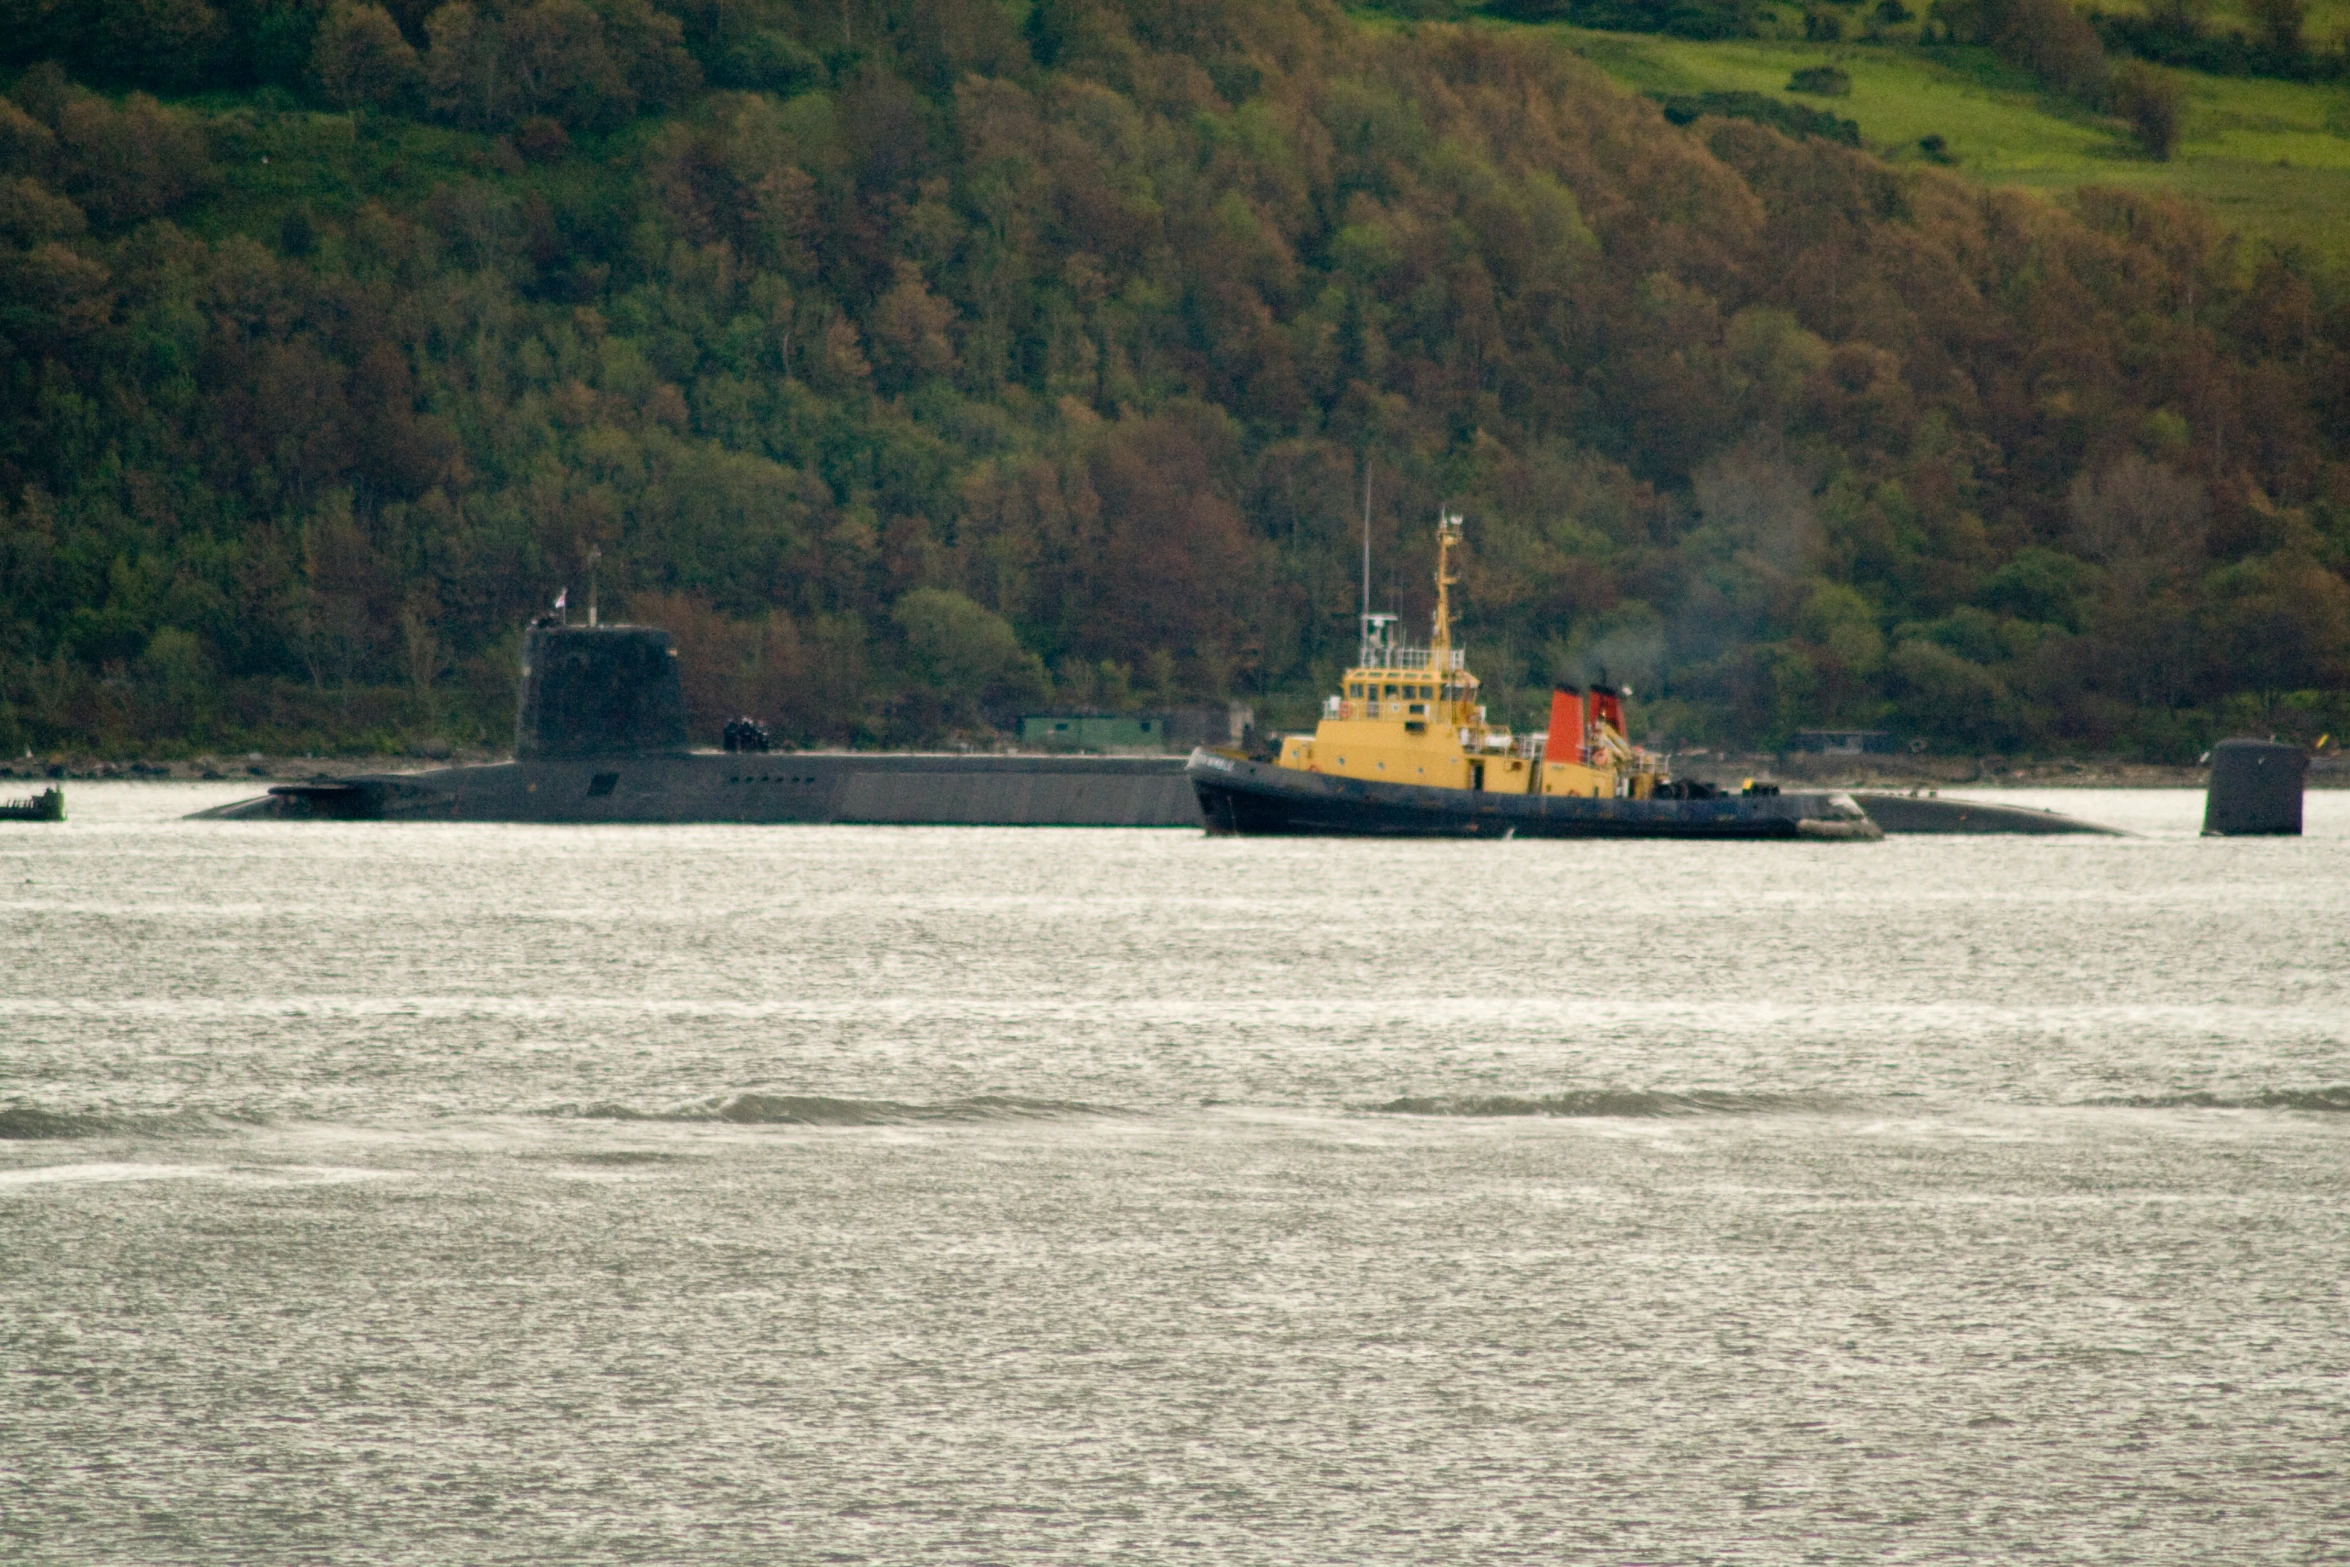 a large tugboat travels along the water